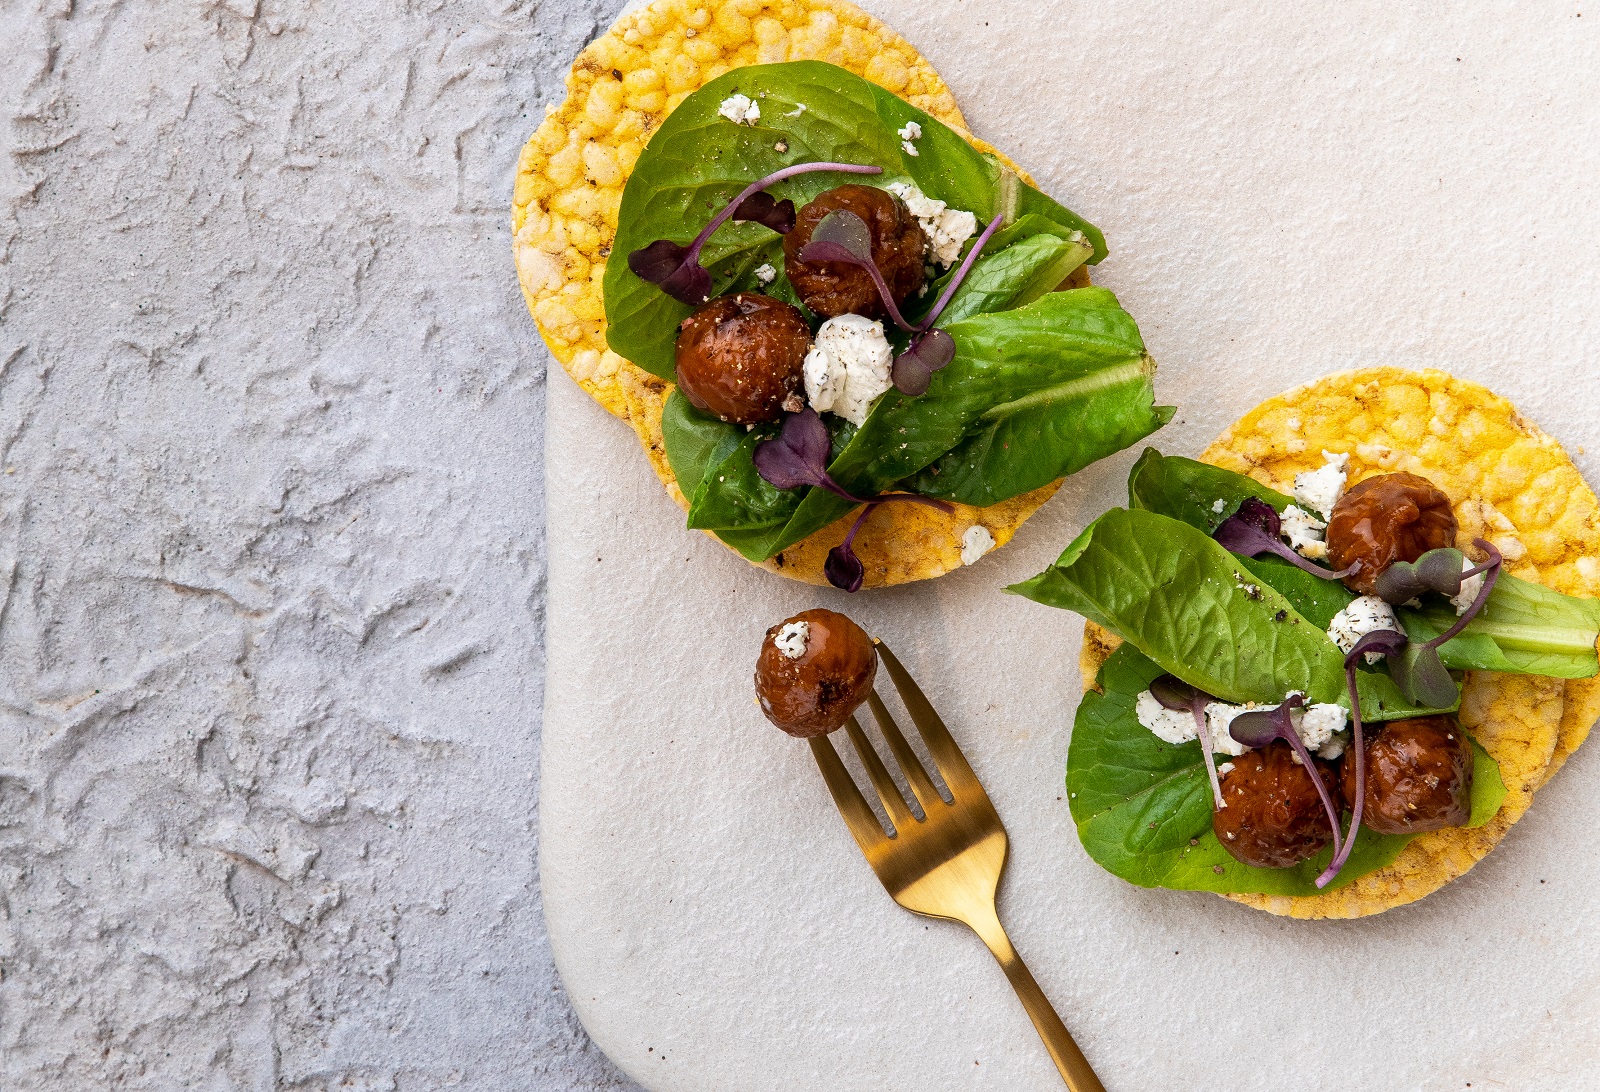 Marinated Baby Fig, Salad & Goats Cheese on CORN THINS slices